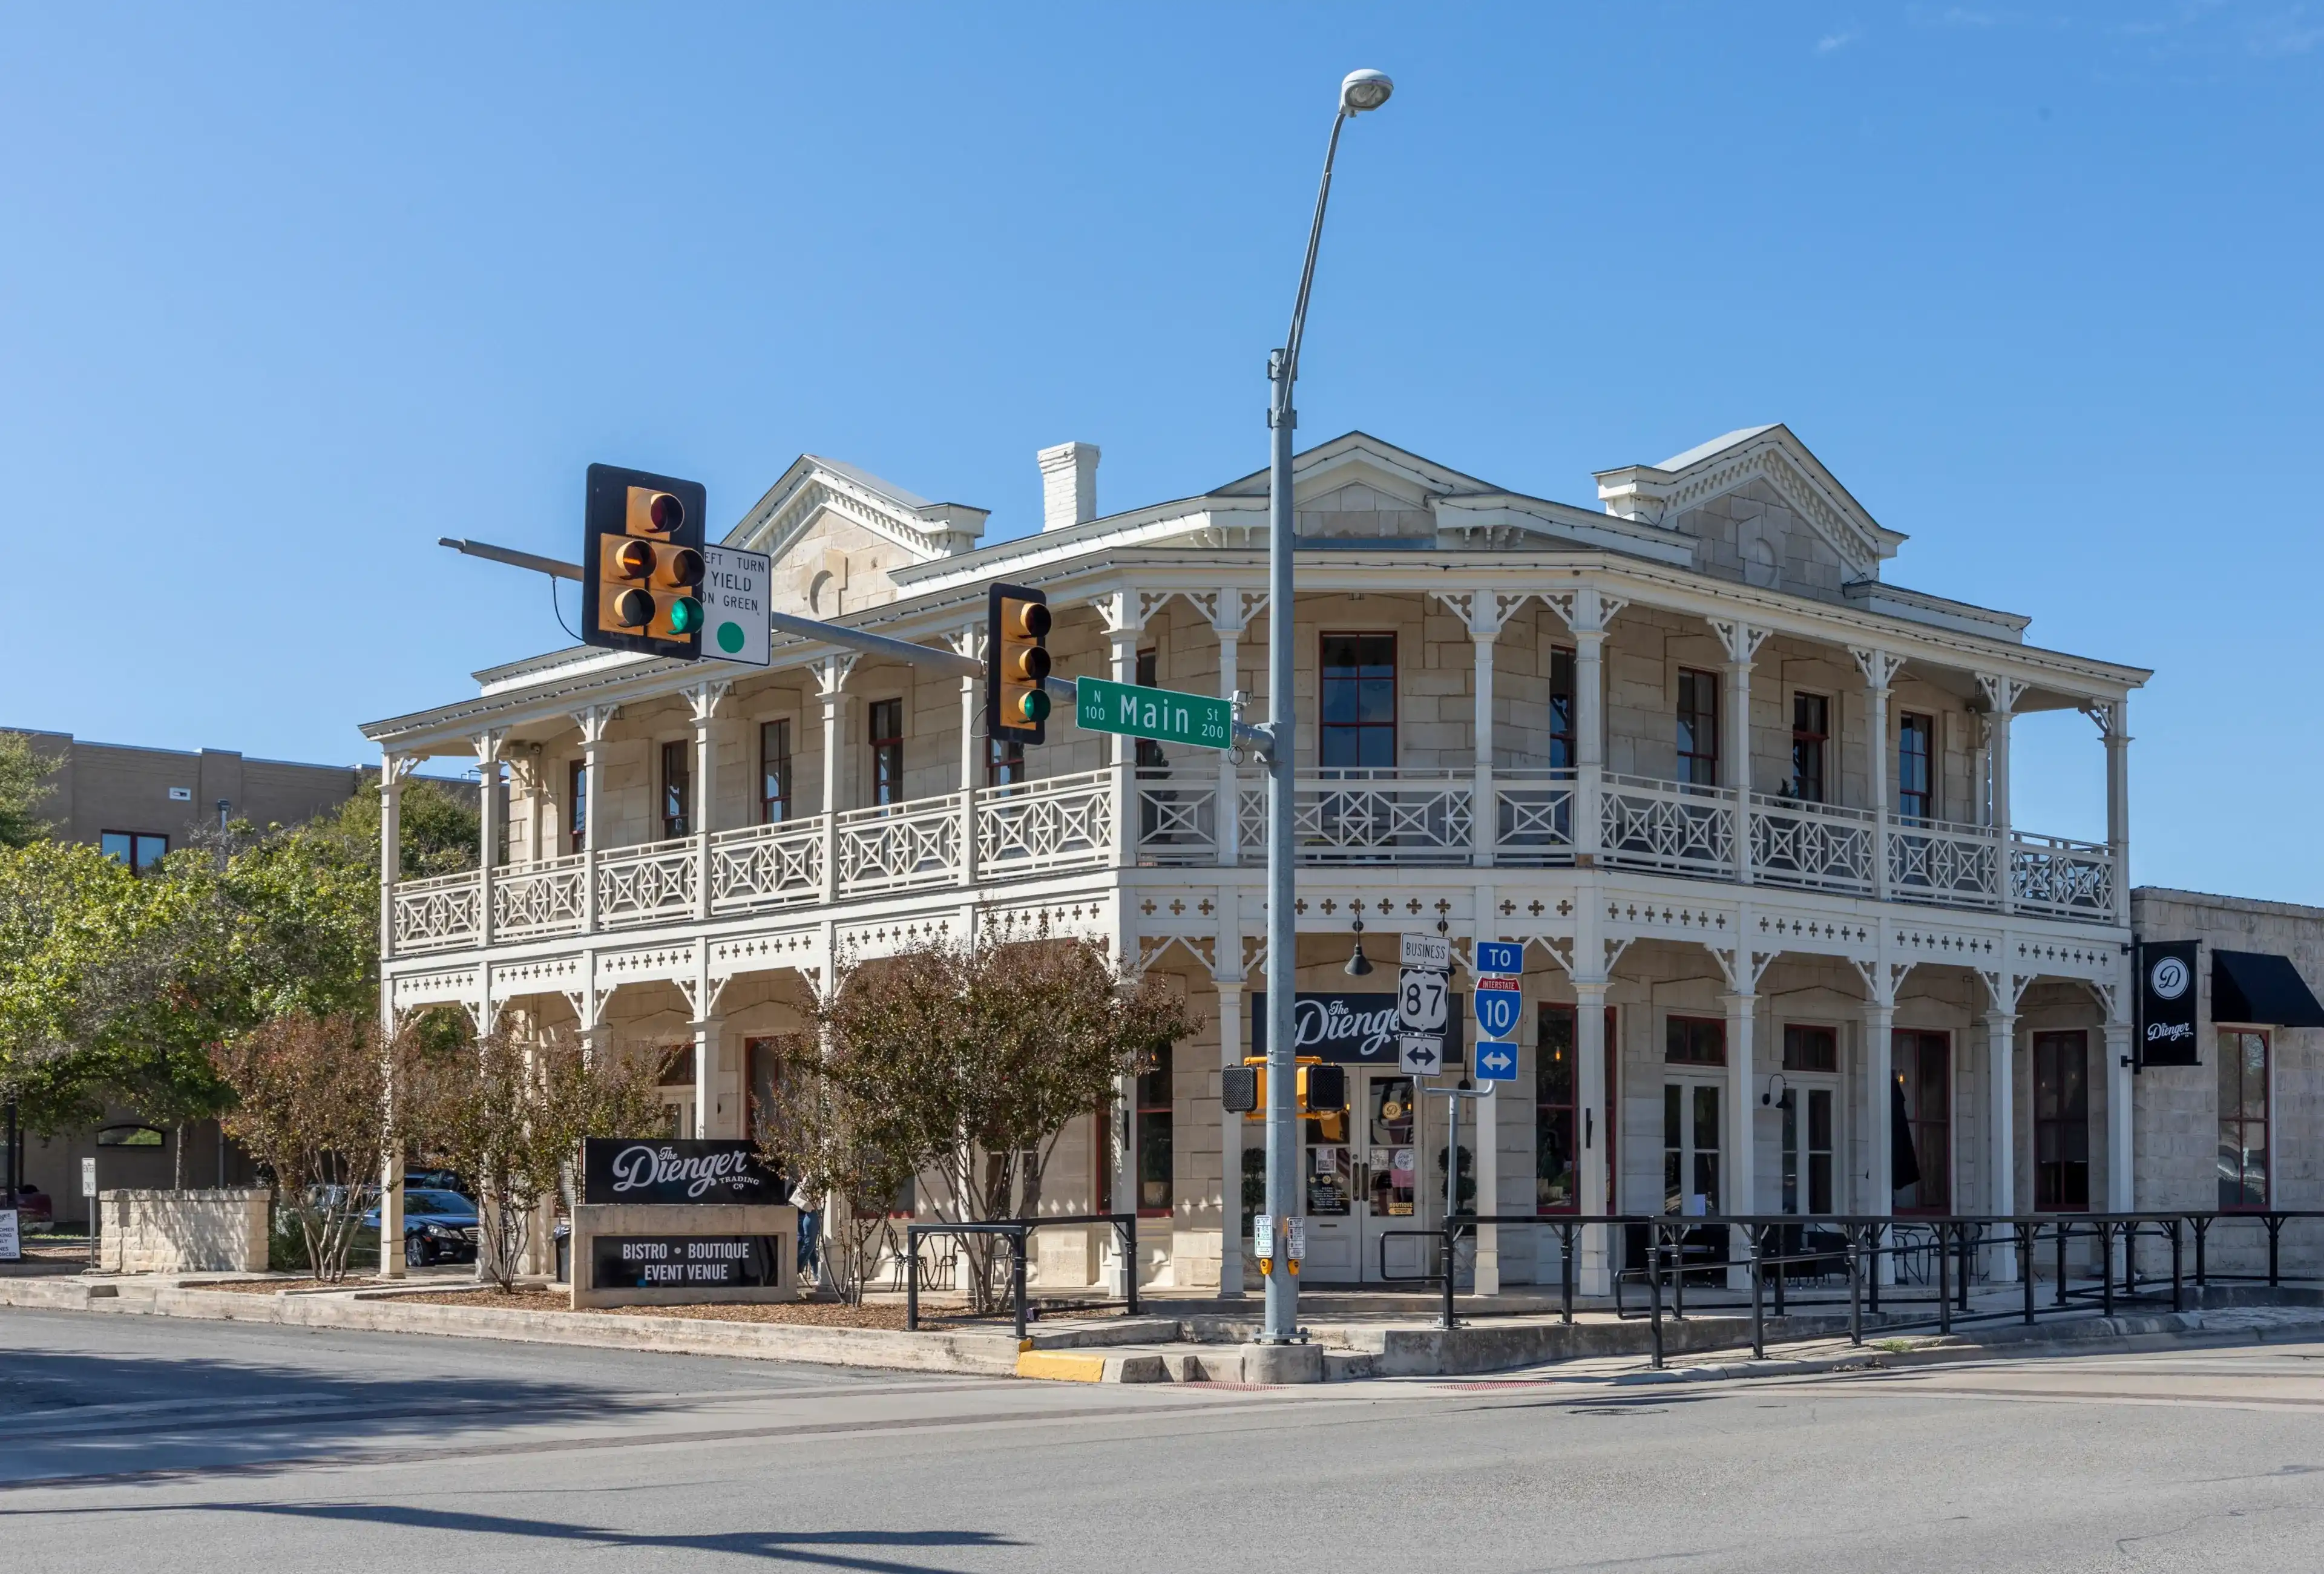 Best Boerne hotels. Cheap hotels in Boerne, Texas, United States